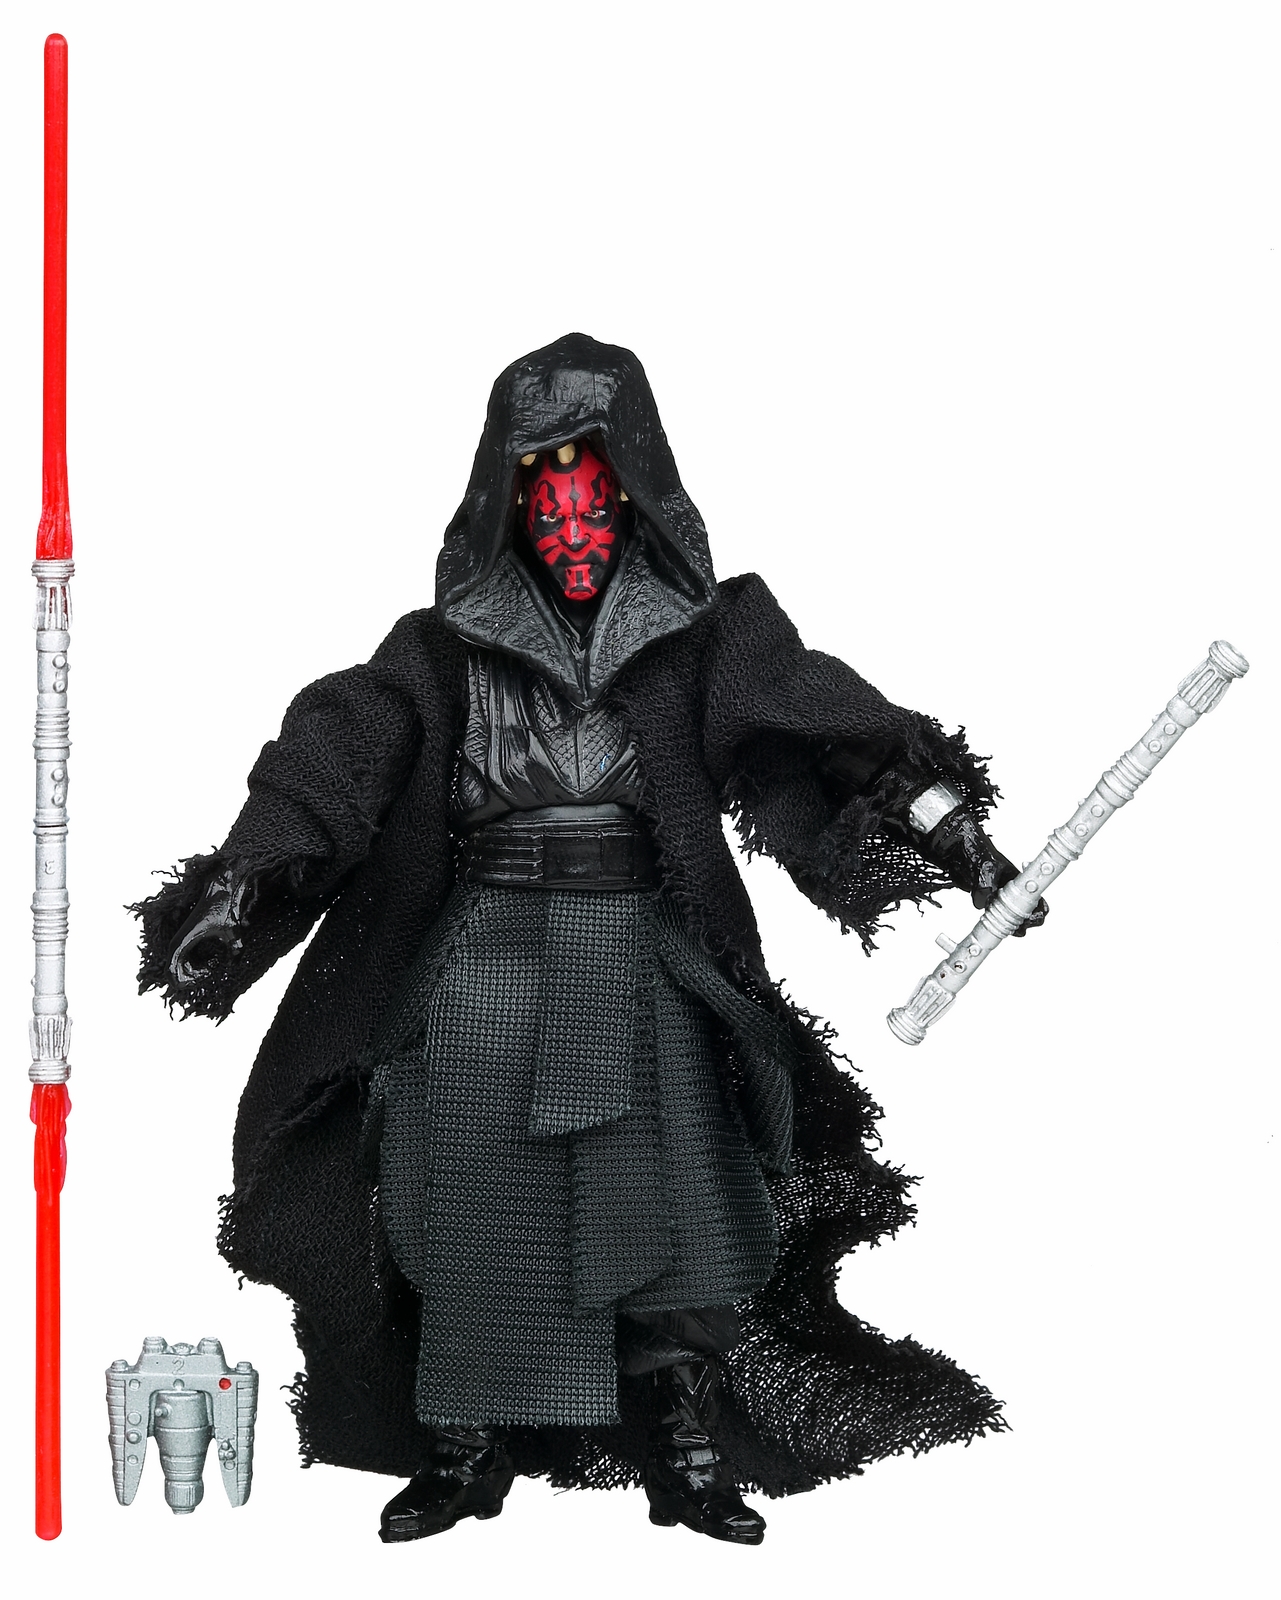 STAR WARS THE VINTAGE COLLECTION 3.75-INCH DARTH MAUL Figure.jpg